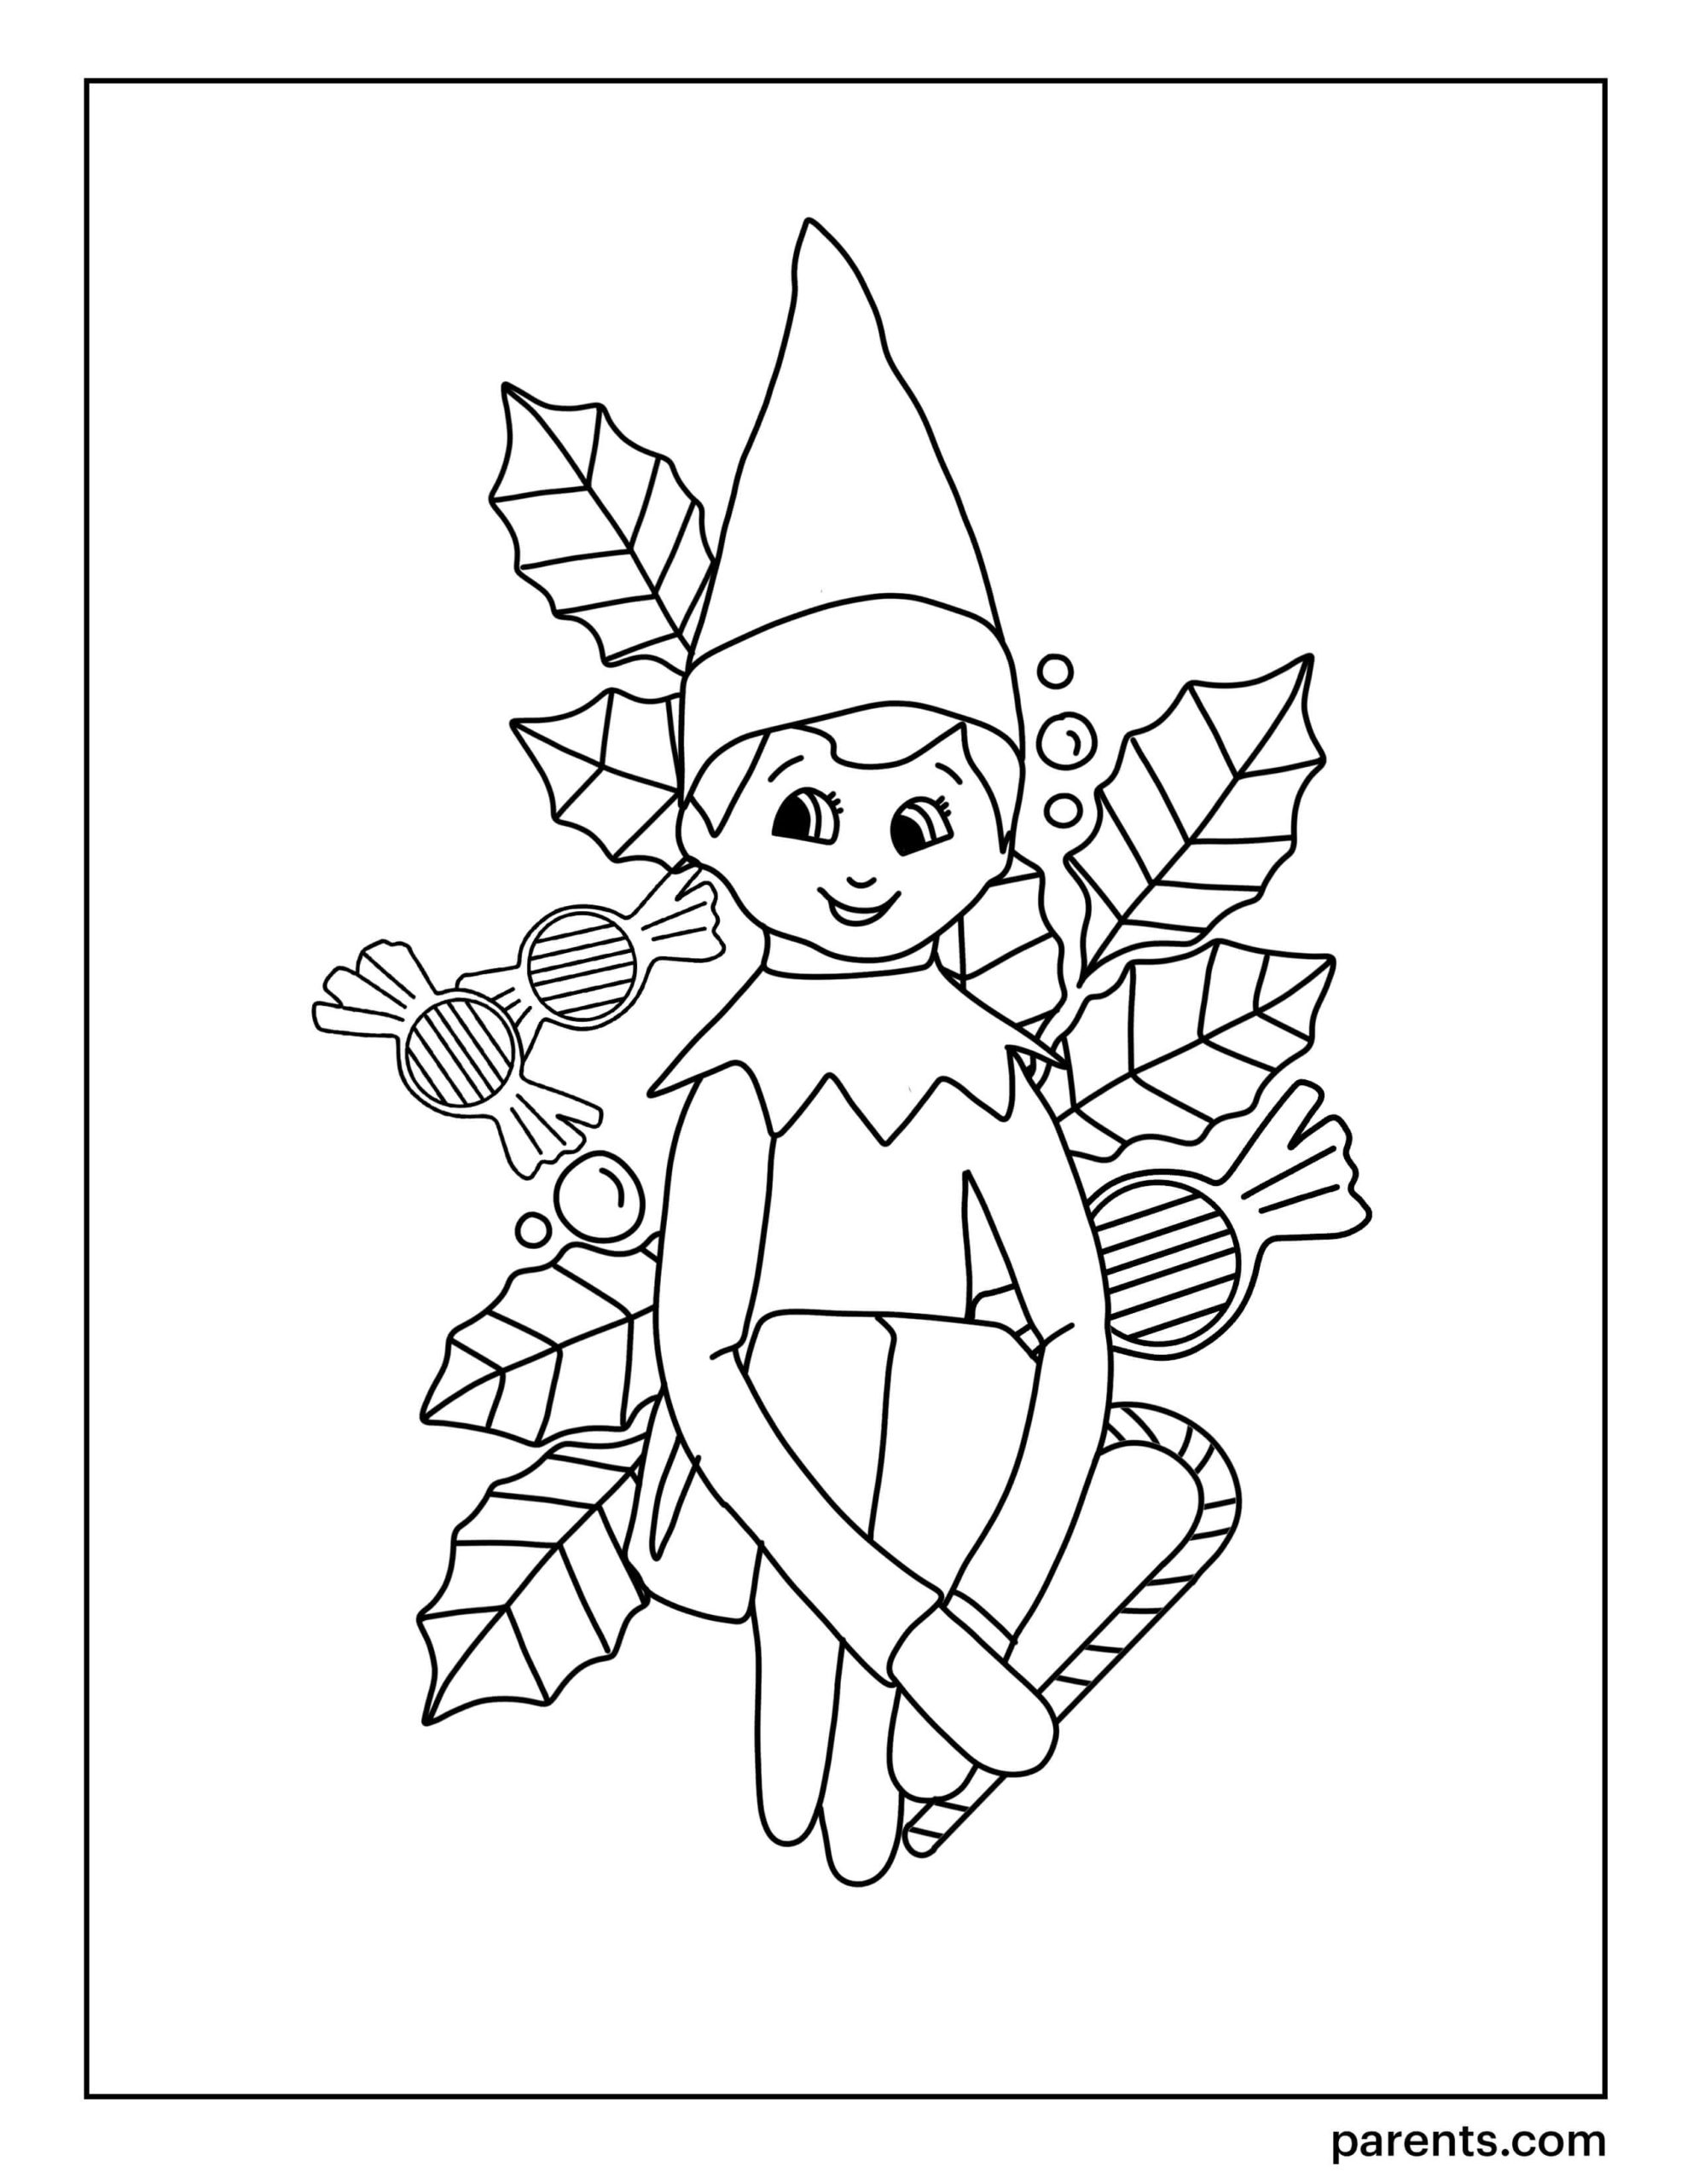 17-printable-elf-coloring-pages-to-enjoy-the-holidays-happier-human